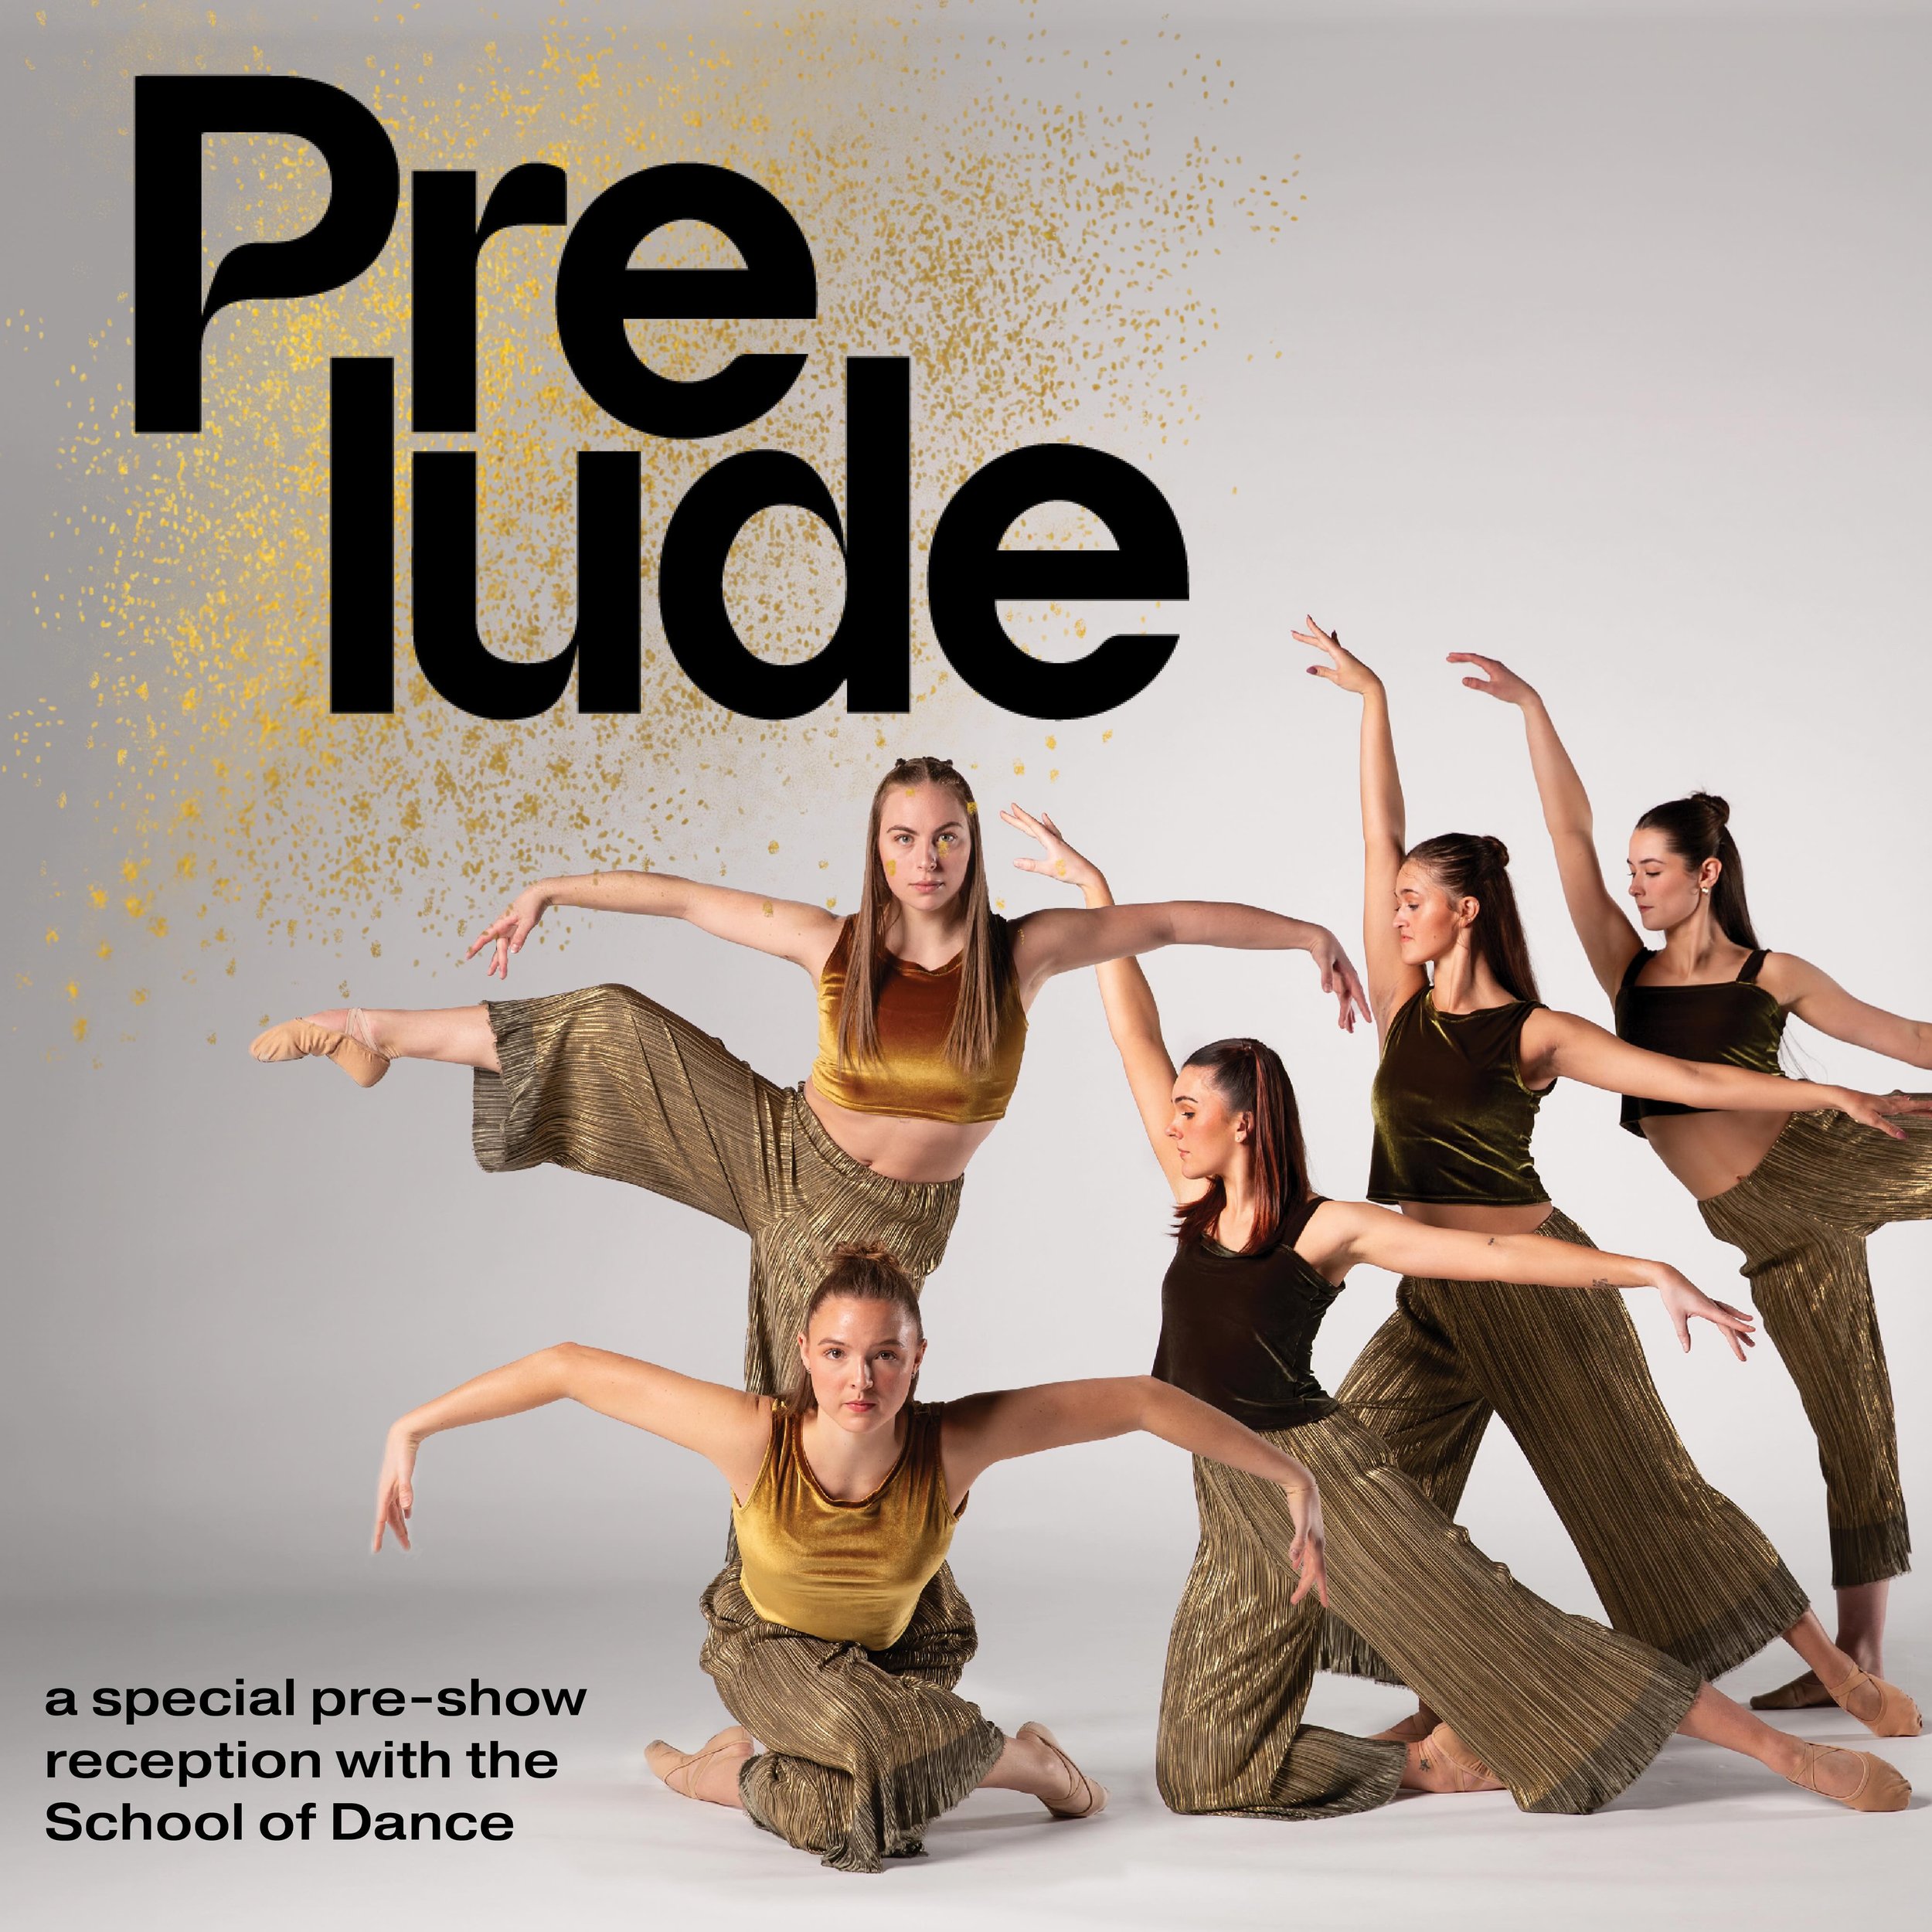 School of Dance Alumni: Please join the School of Dance for a special&nbsp;pre-show reception to connect as alumni, friends, and fellow dance lovers. Light food and drinks provided! ✨🥂Due to alcohol being served, this event is 21+.🥂✨  Saturday, Apr